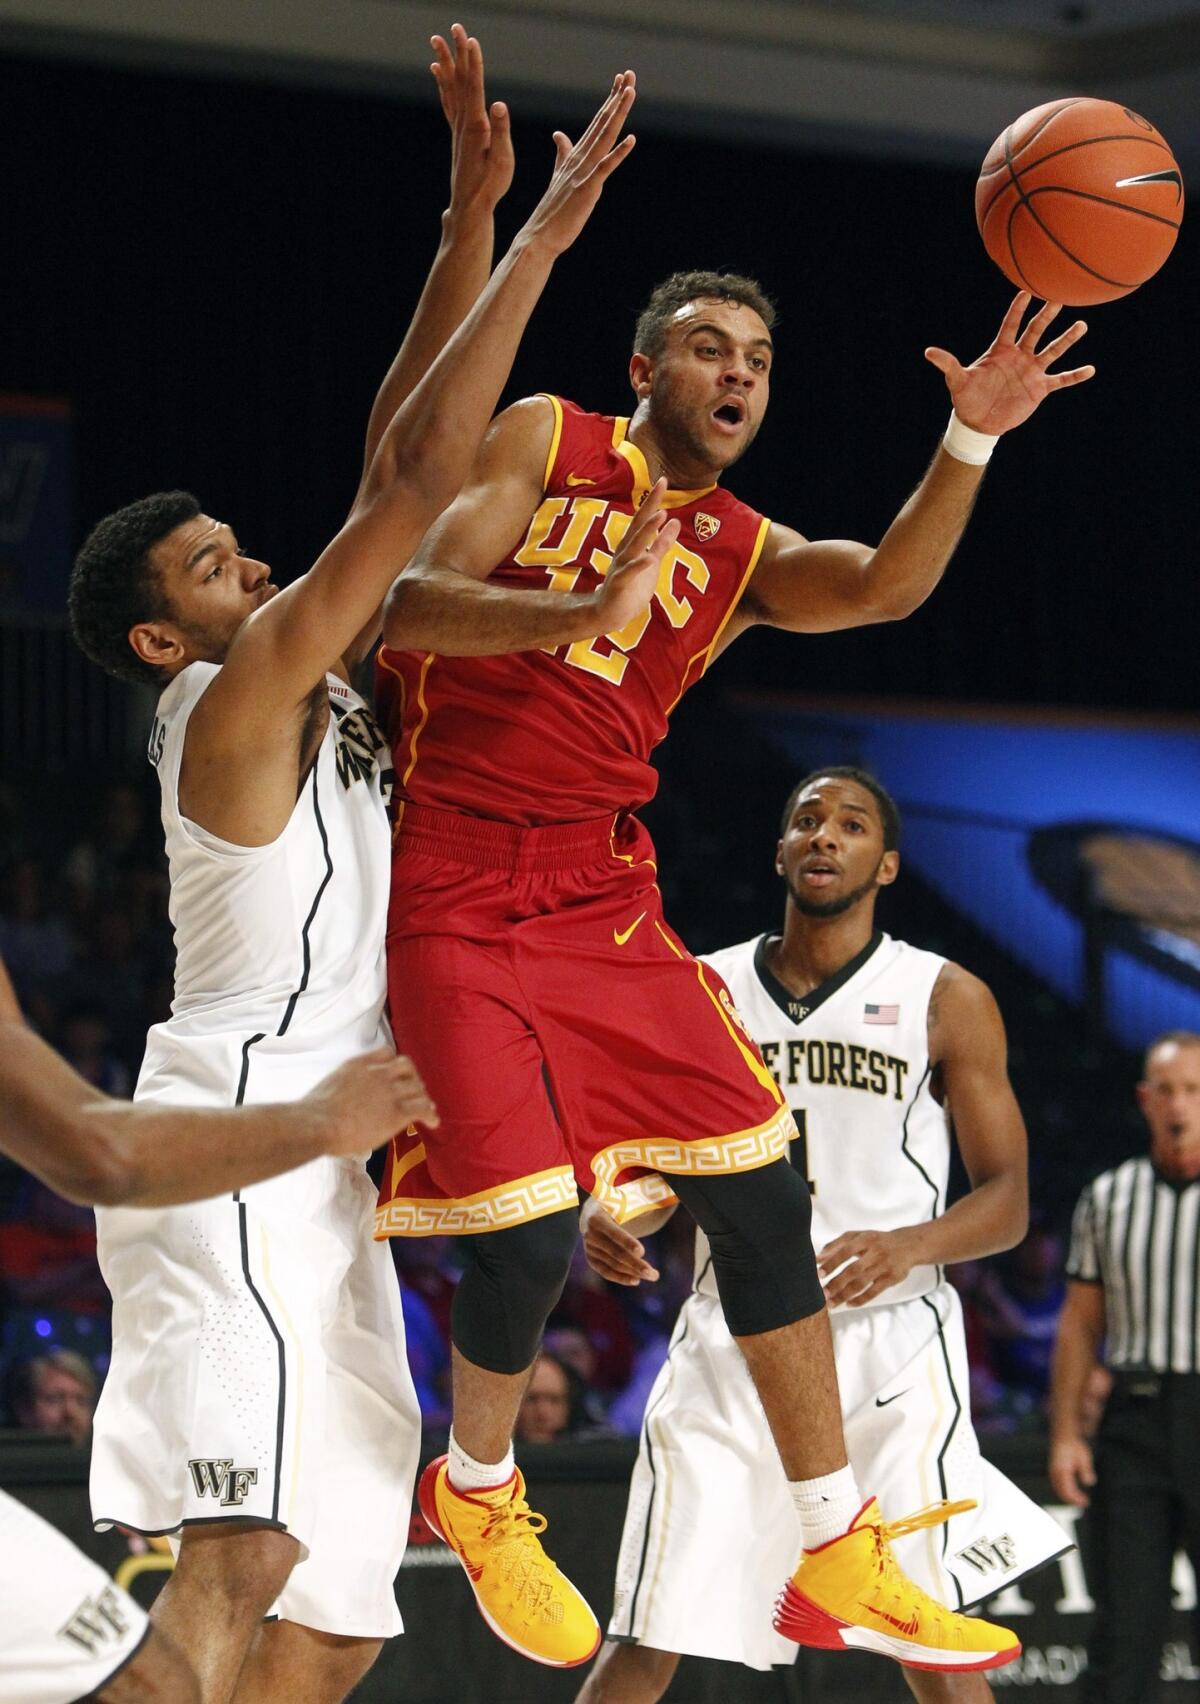 USC's Julian Jacobs makes a pass during a game against Wake Forrest on Nov. 29. Jacobs scored 16 points in the Trojans' 78-62 win Sunday over Boston College.